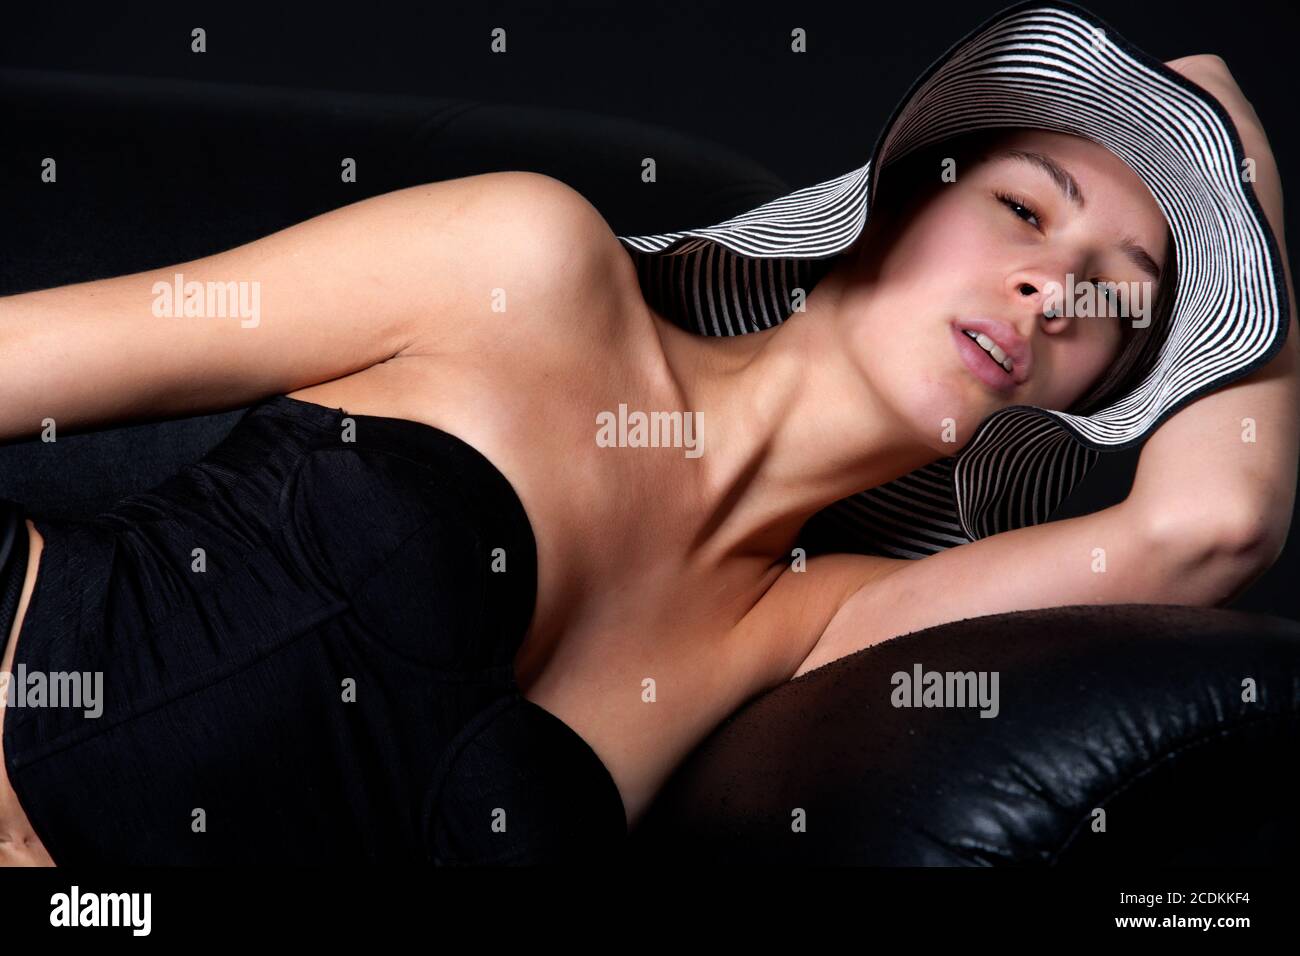 Young mult etnic woman in 50's lingery on couch Stock Photo